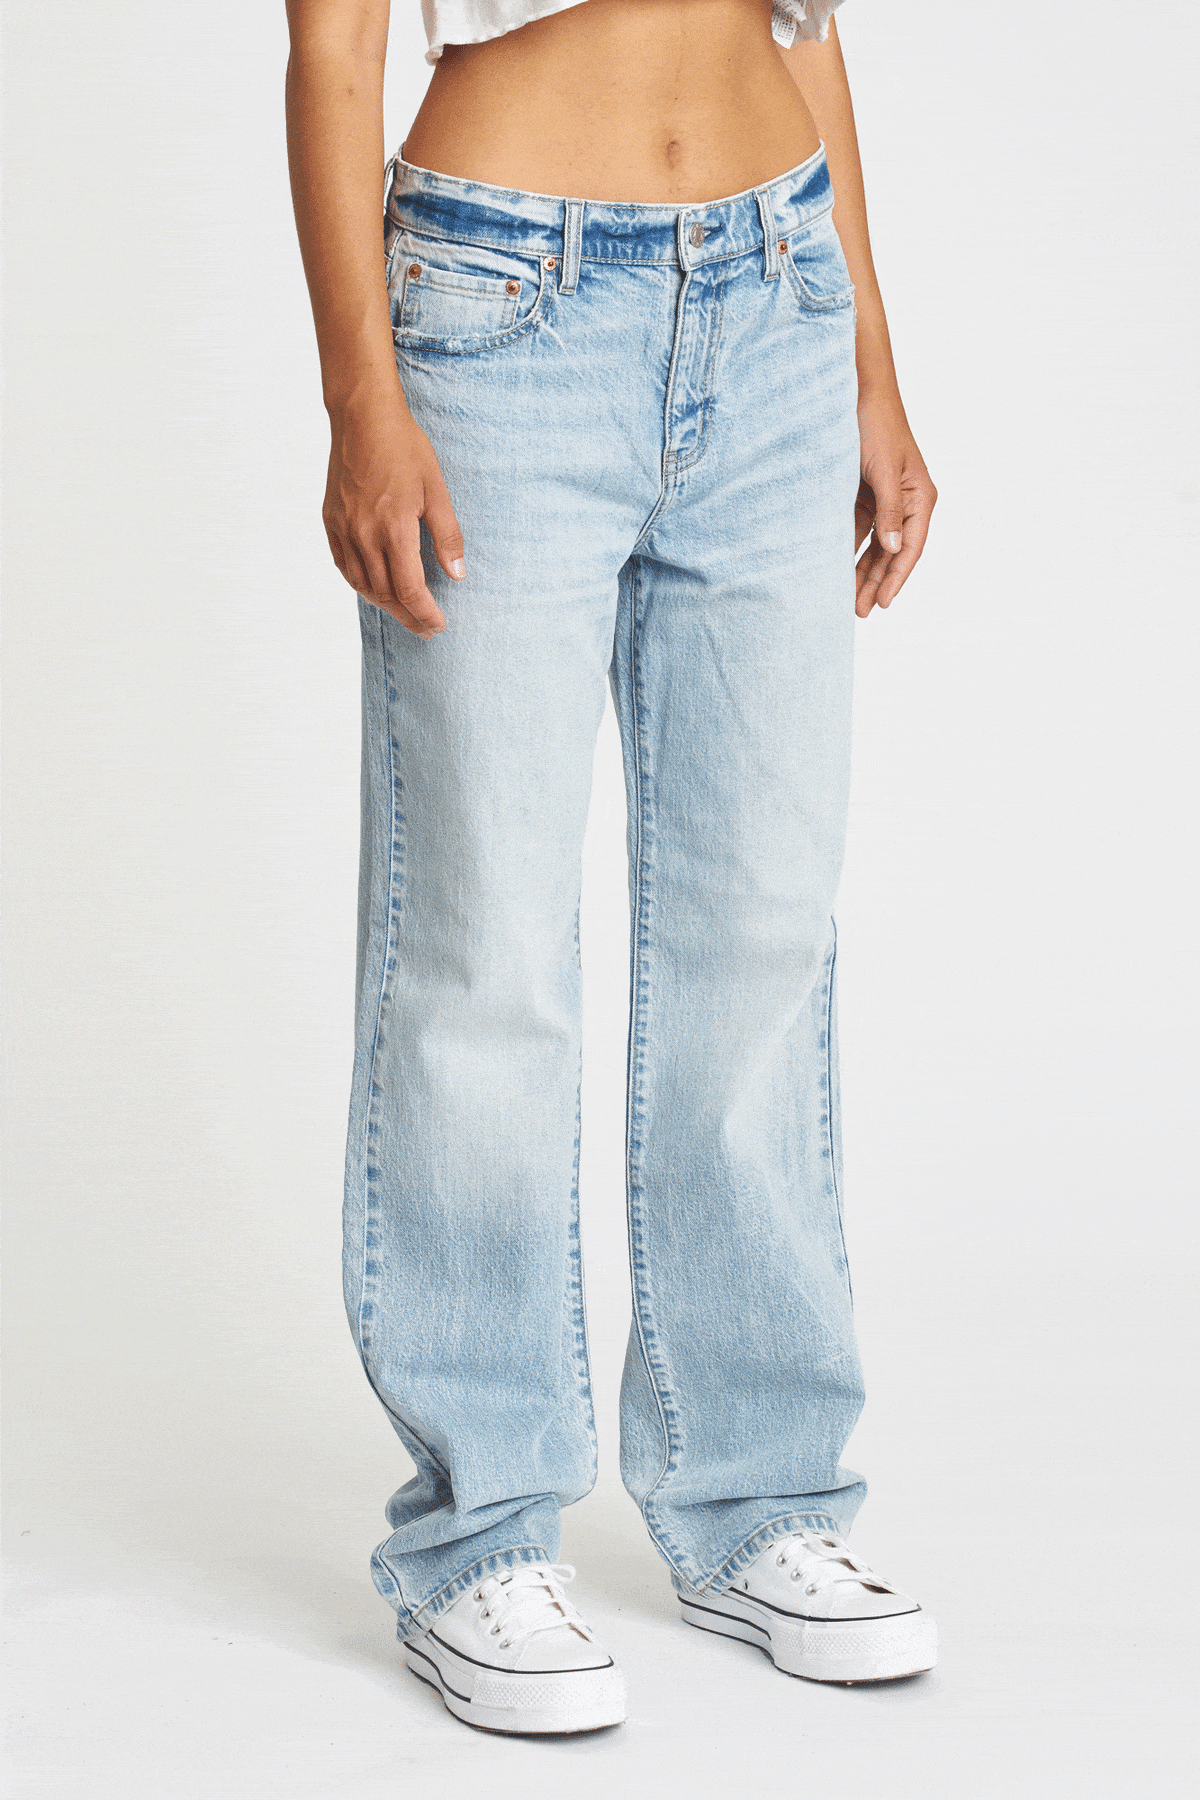 1999 Jeans Slouch For Real, Denim by Daze | LIT Boutique